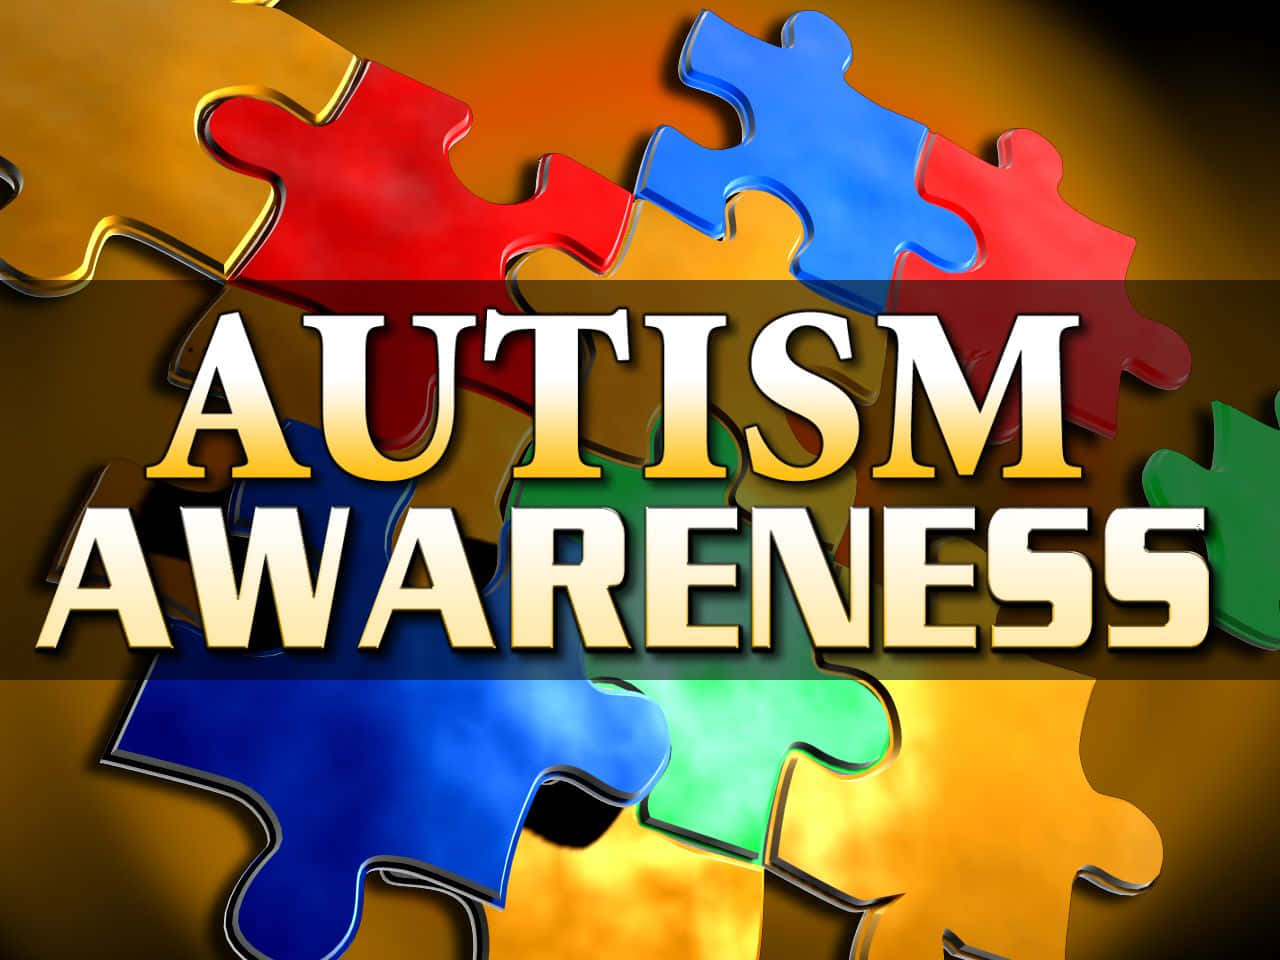 Autism Awareness Logo With Colorful Puzzle Pieces